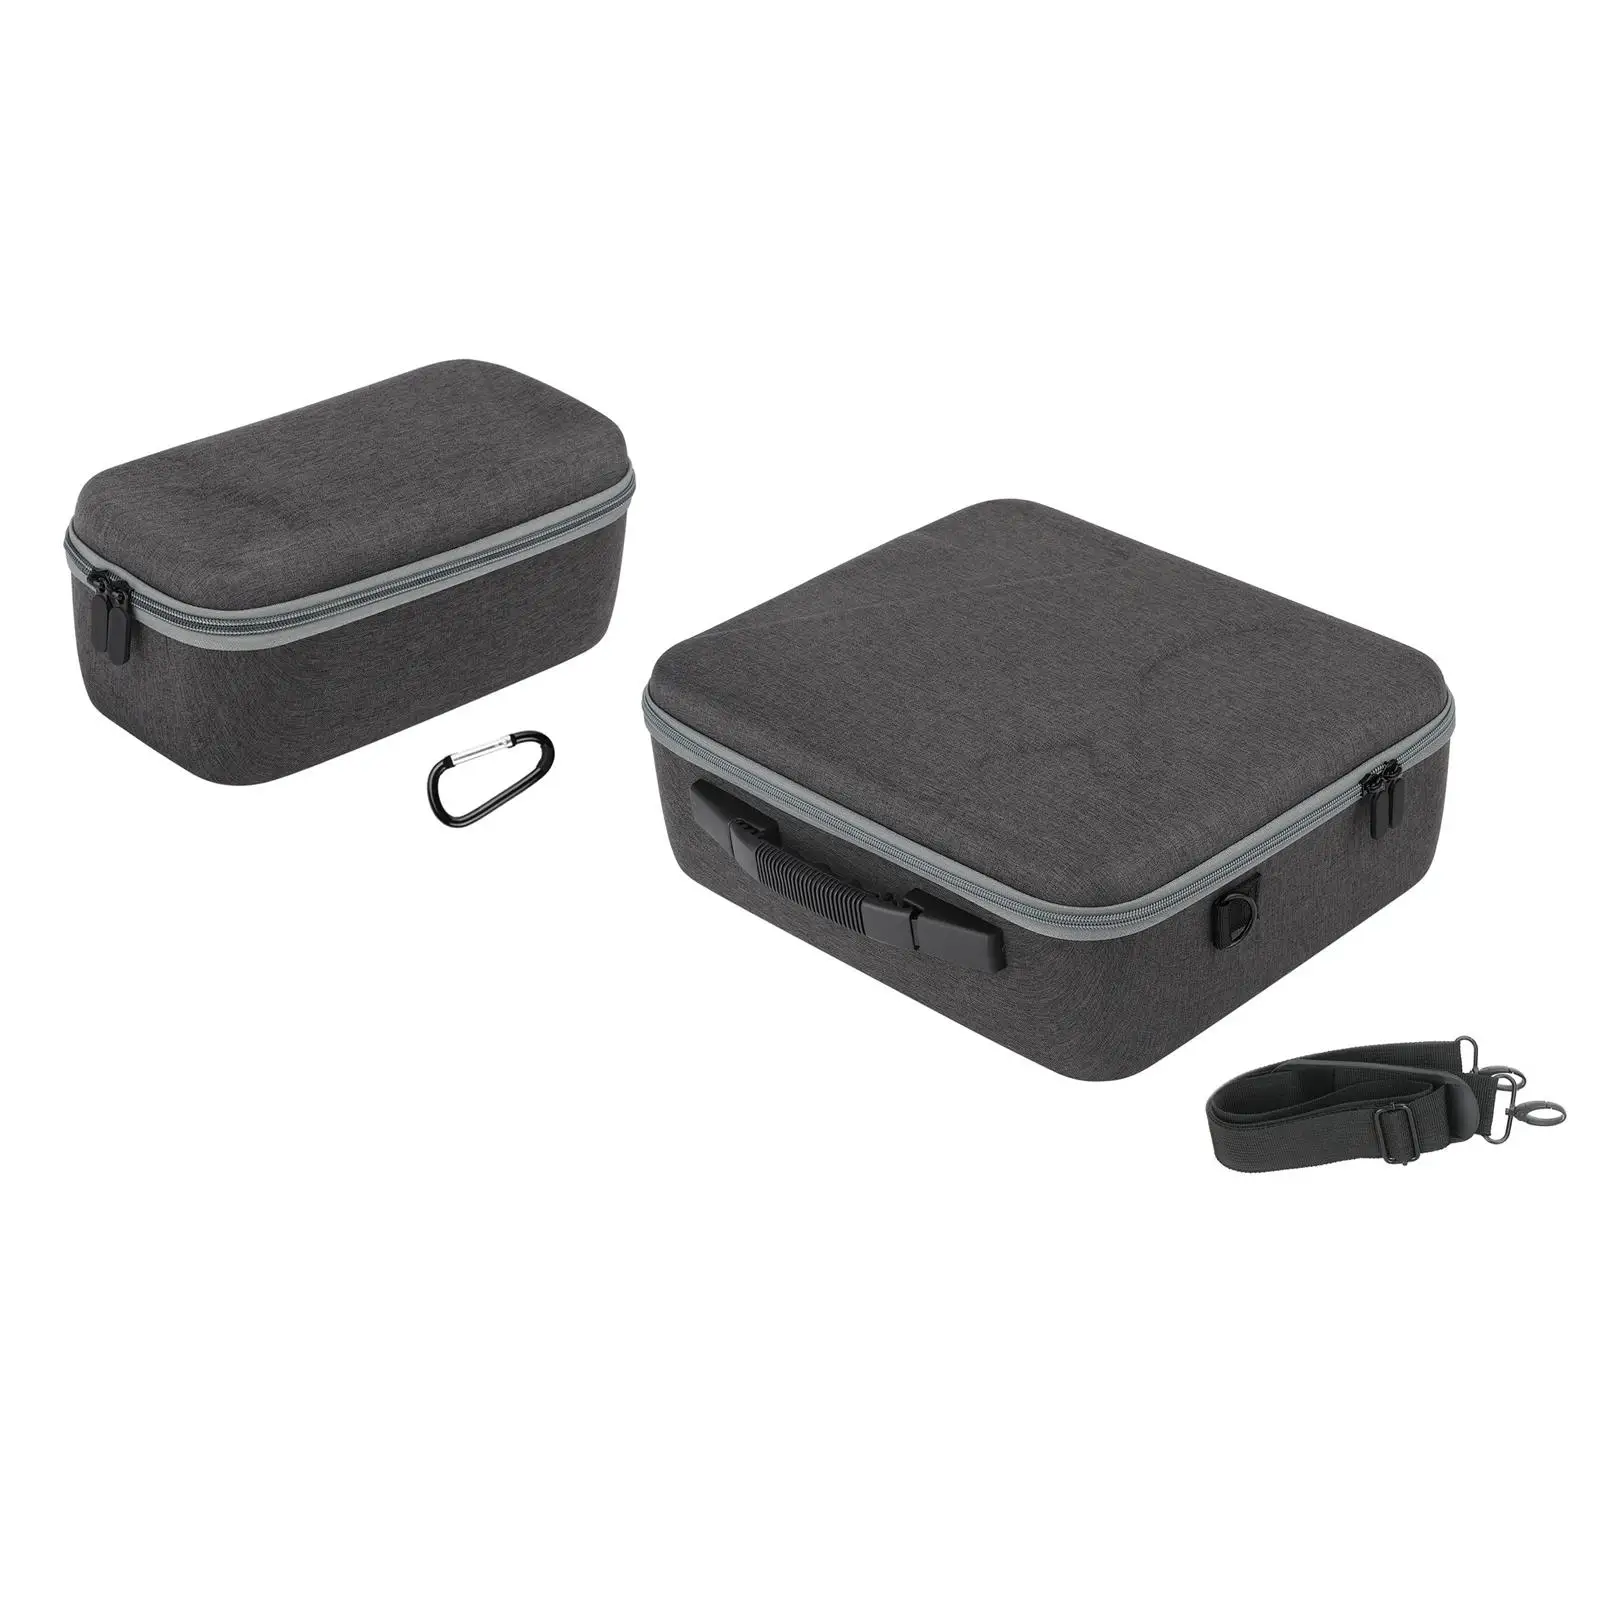 Carrying Case Shockproof Hard Case Outdoor Travel Storage Carrying Bag for Mavic 3 Pro Remote Controller Quadcopter Mavic 3 RC